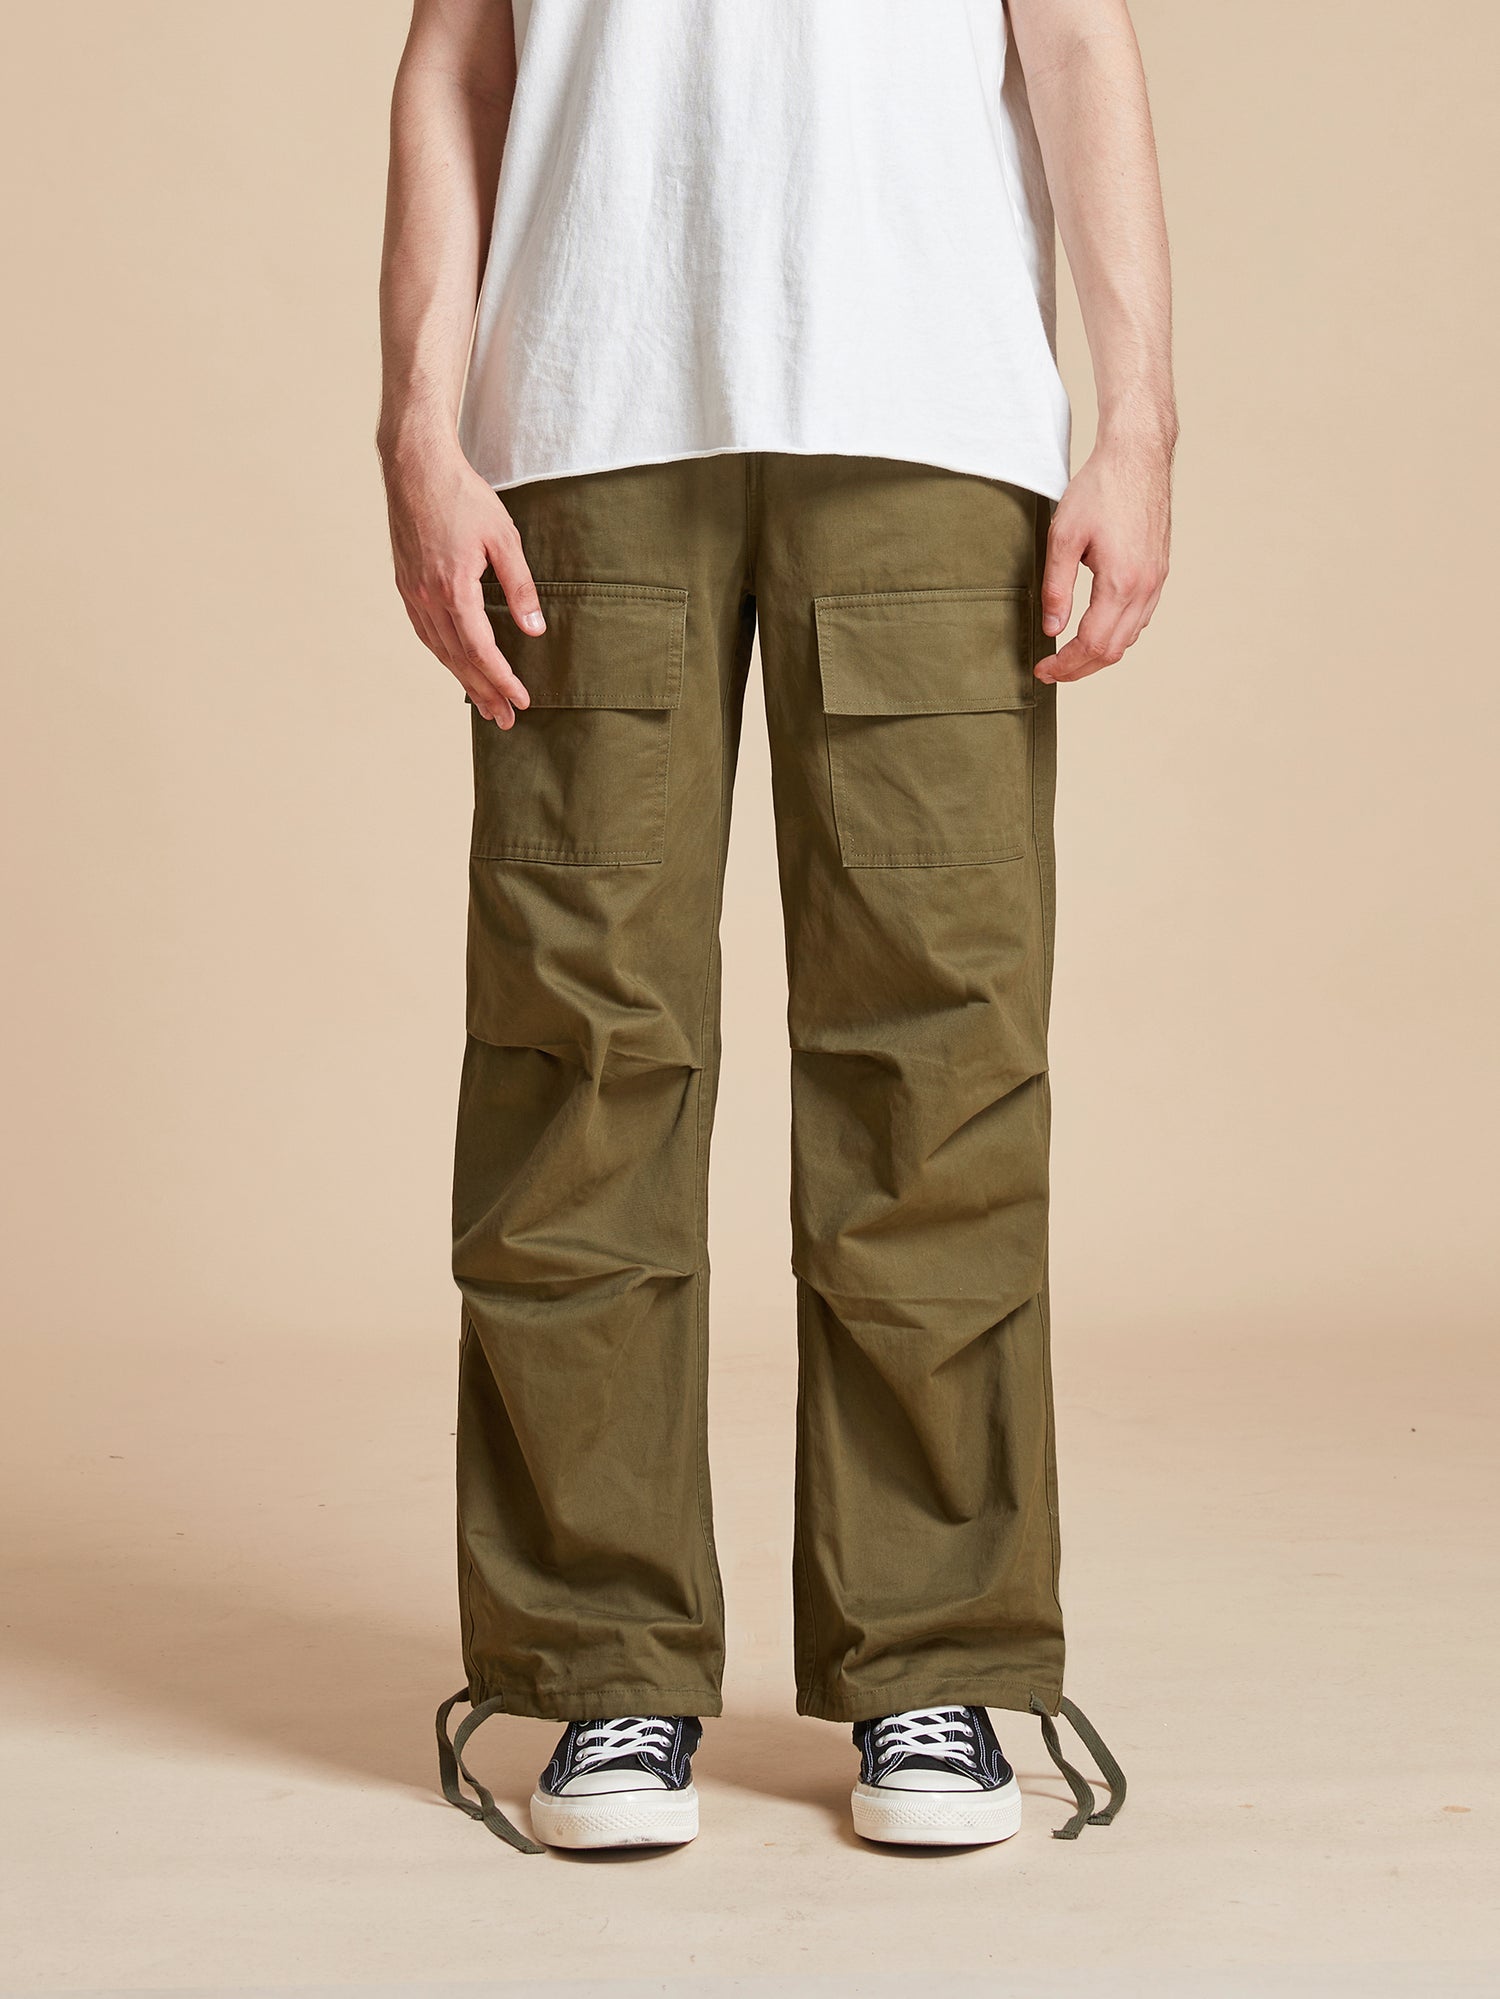 A man wearing Found's Parachute Cargo Twill Pants and a white t-shirt.